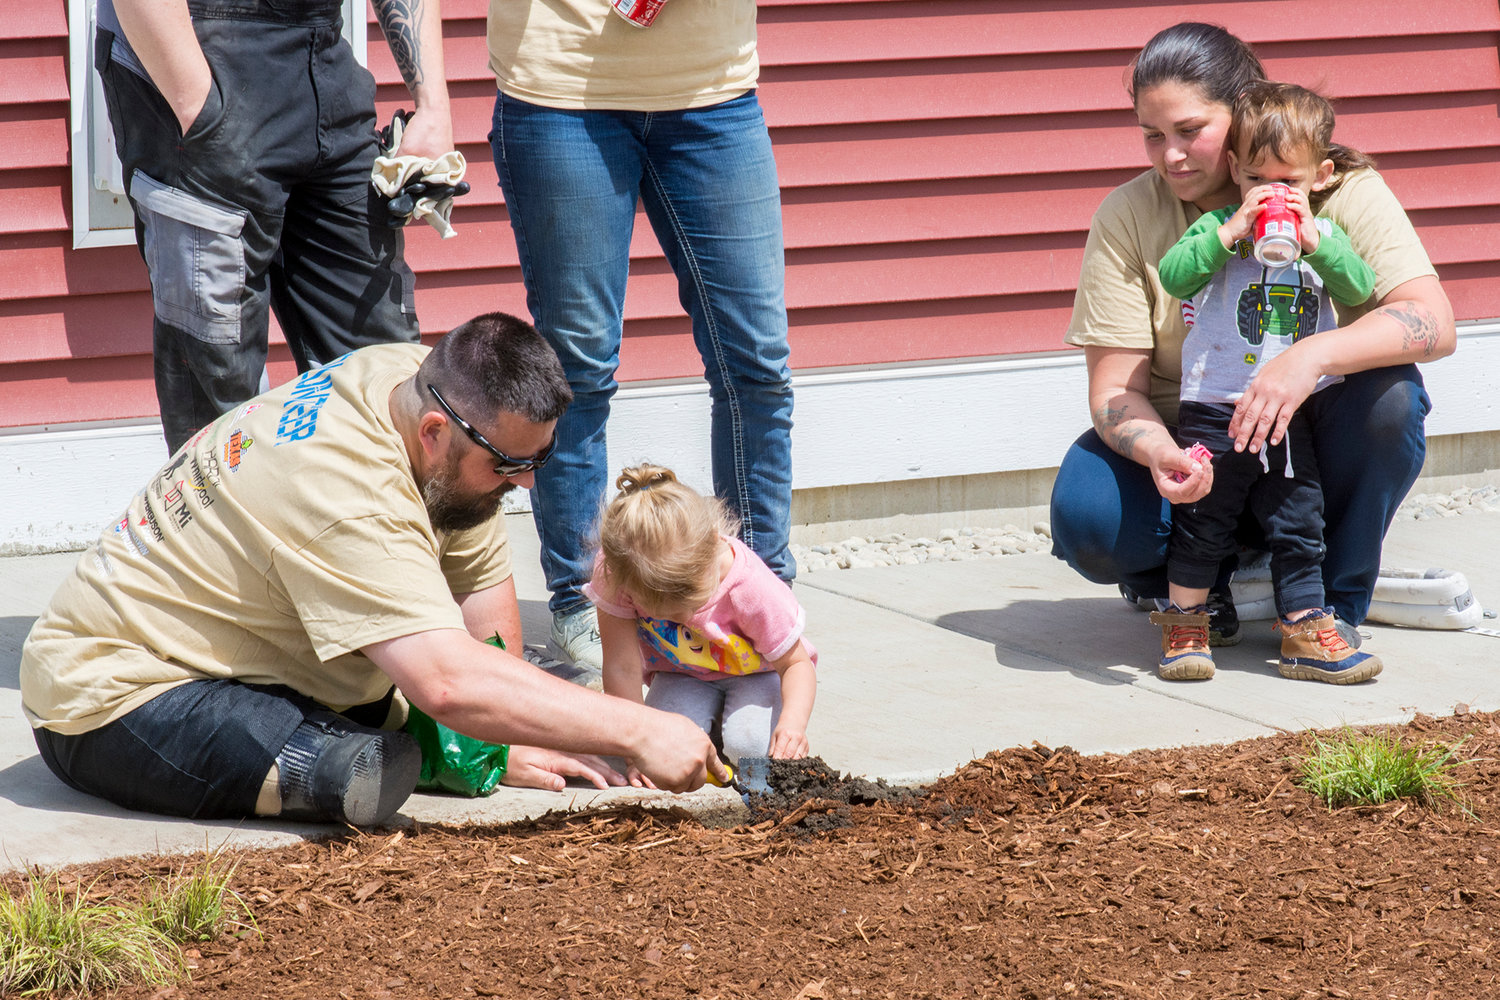 Jereme Sawyer, left, makes a new friend while doing some landscaping during a community volunteer day at the adapted house being built for him by national nonprofit Homes For Our Troops.